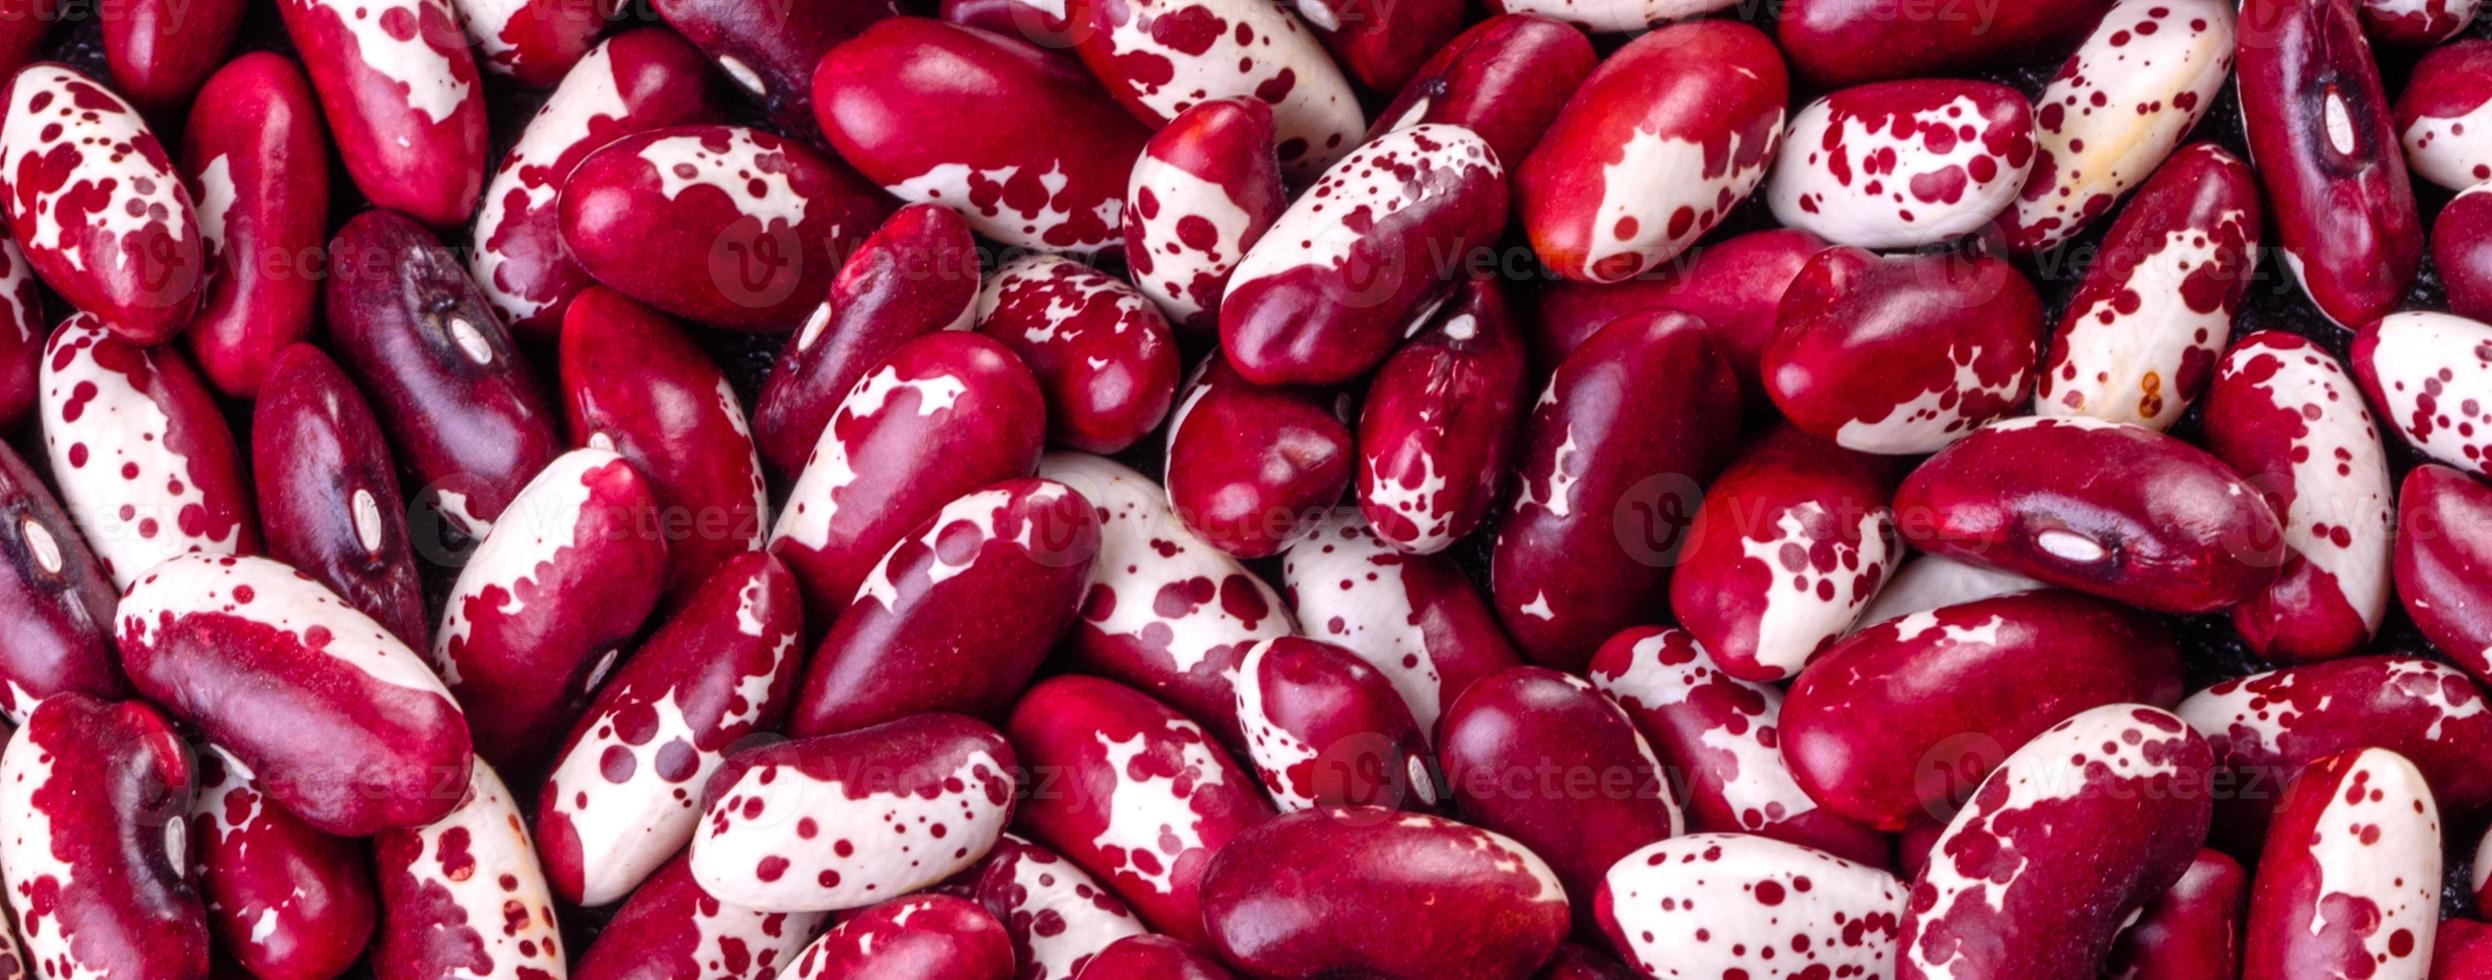 Beautiful multicolored beans close-up on a concrete background photo